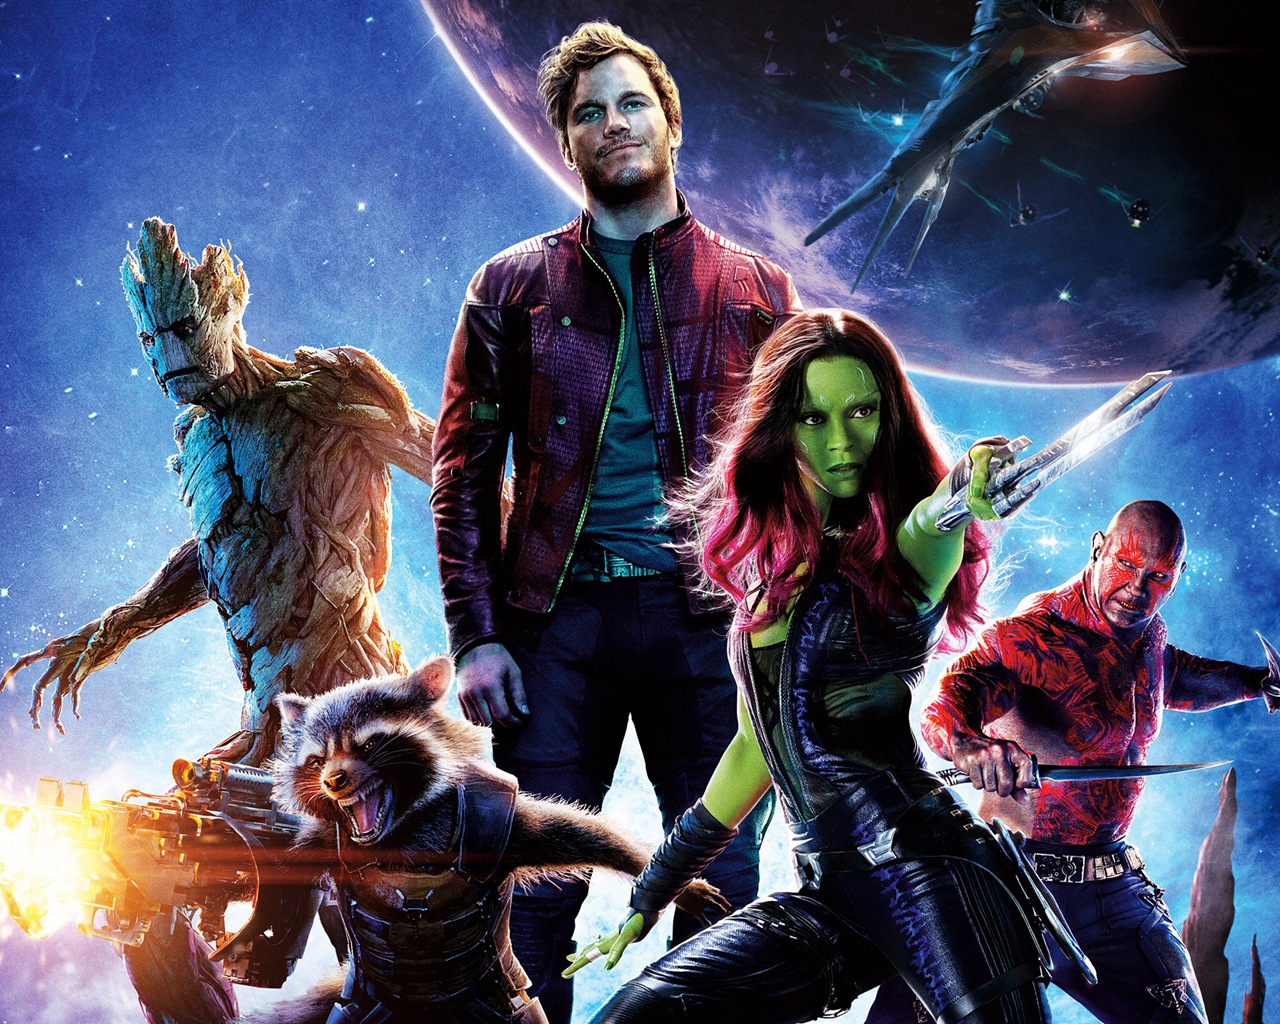 Guardians of the Galaxy 2014 HD movie wallpapers #1 - 1280x1024